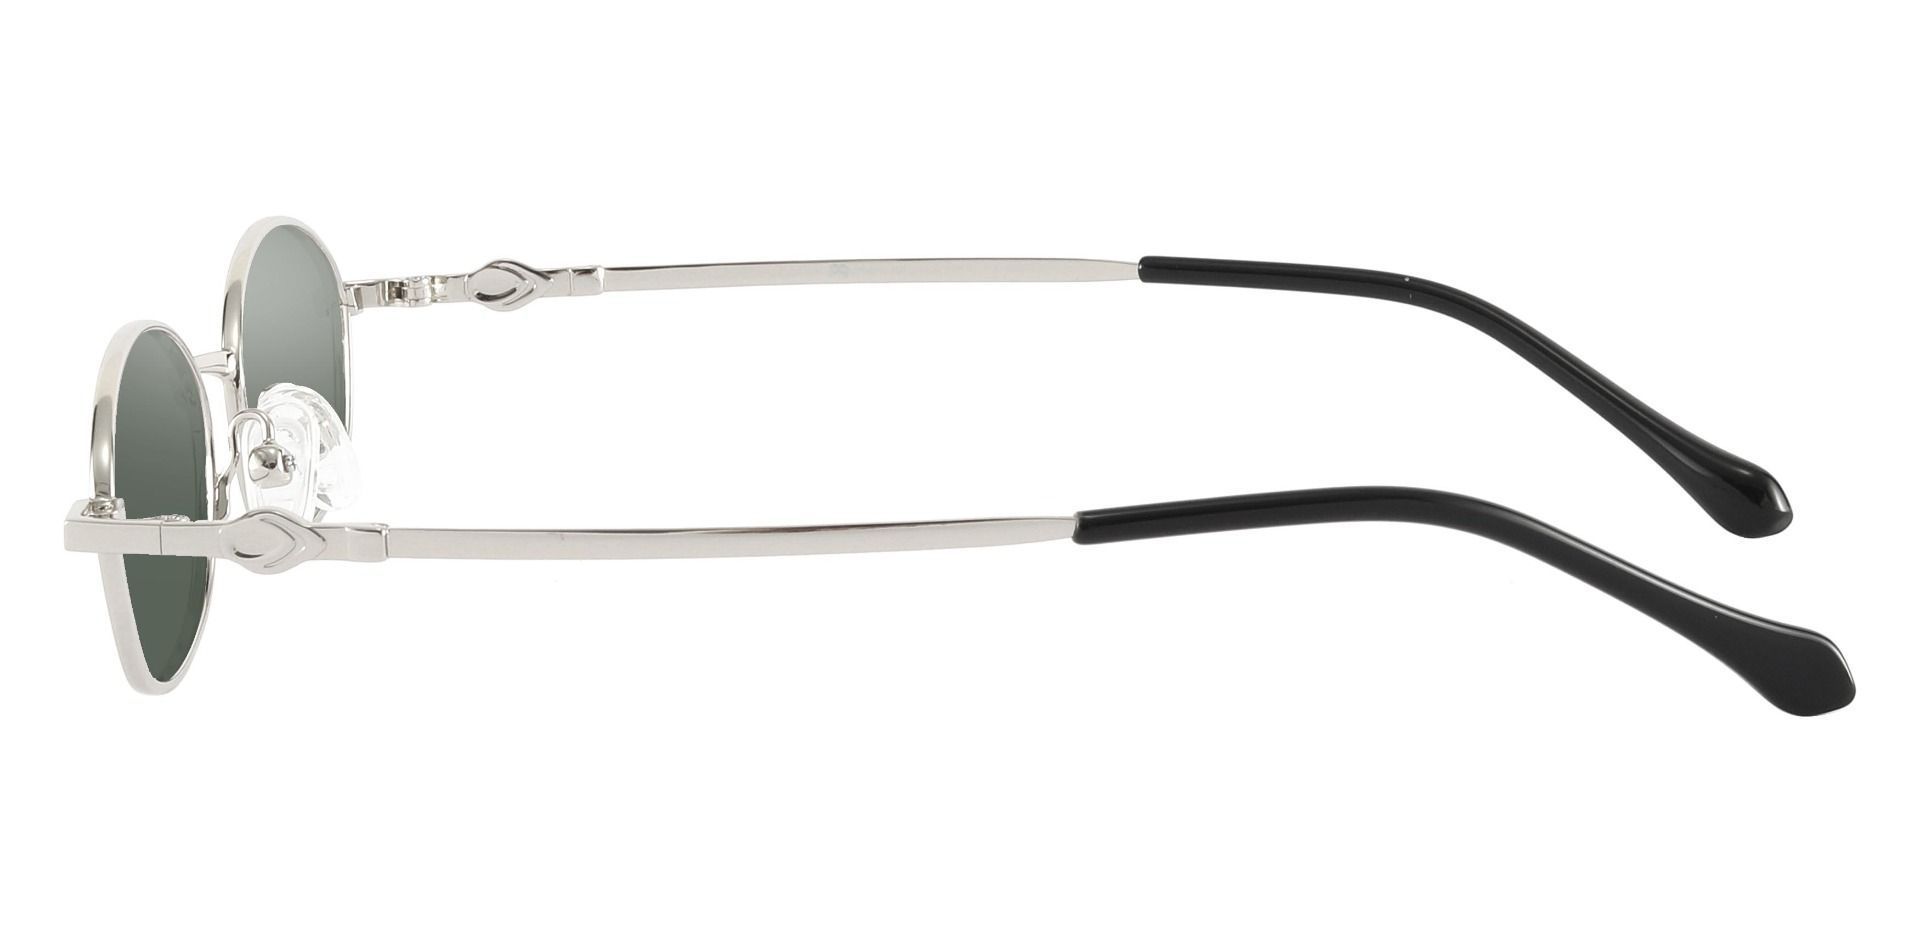 Fletcher Oval Non-Rx Sunglasses - Silver Frame With Green Lenses